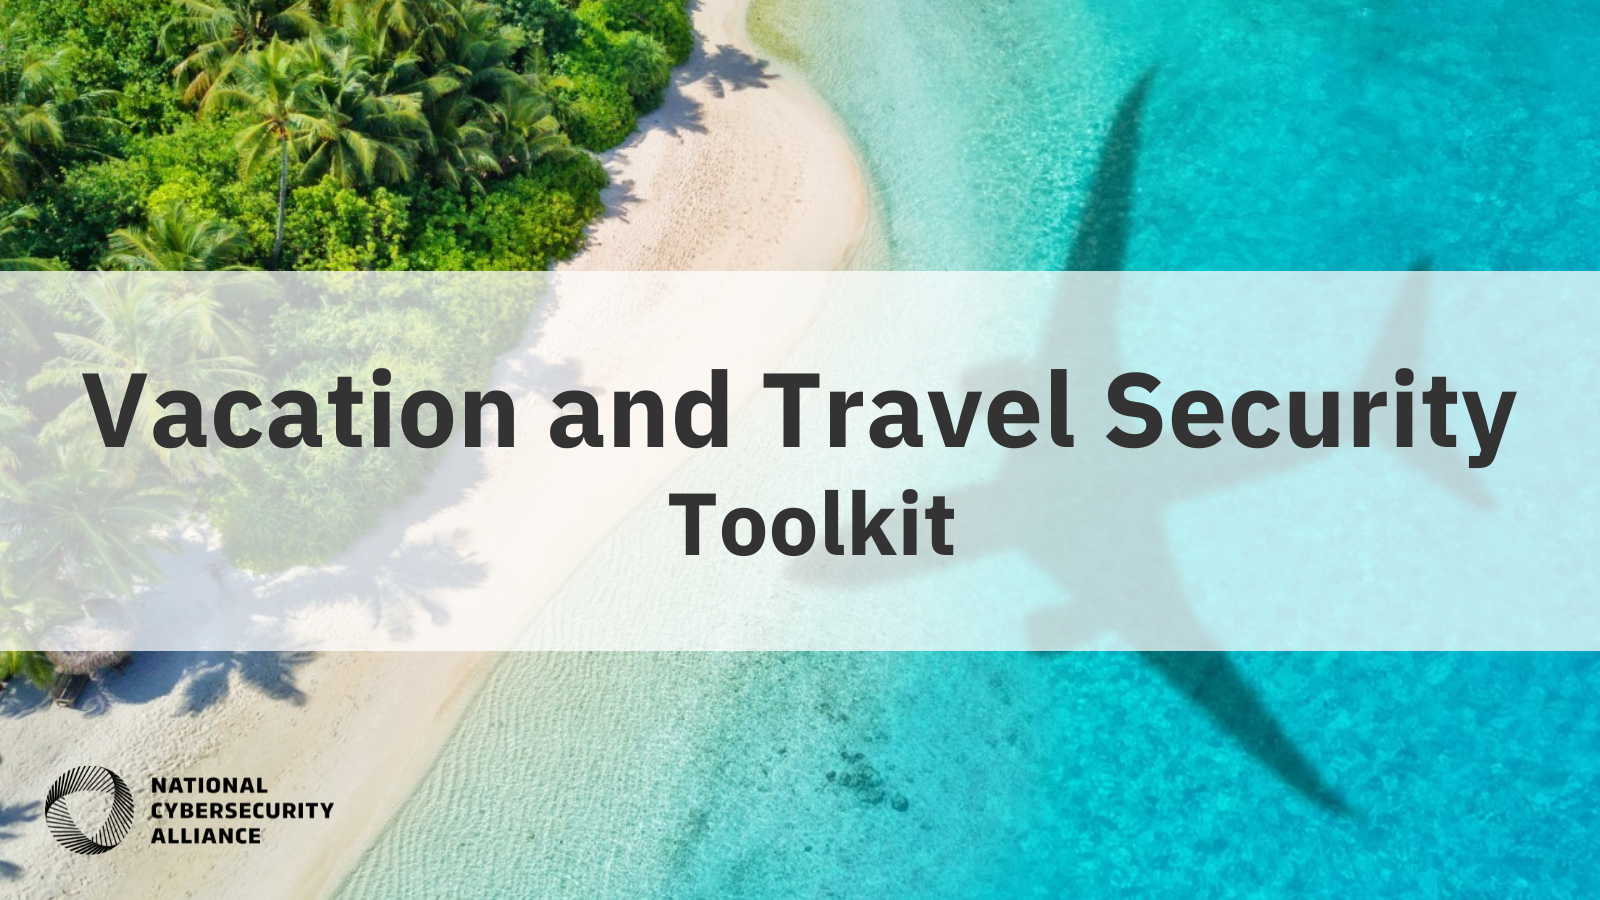 Vacation and Travel Security Tips - National Cybersecurity Alliance